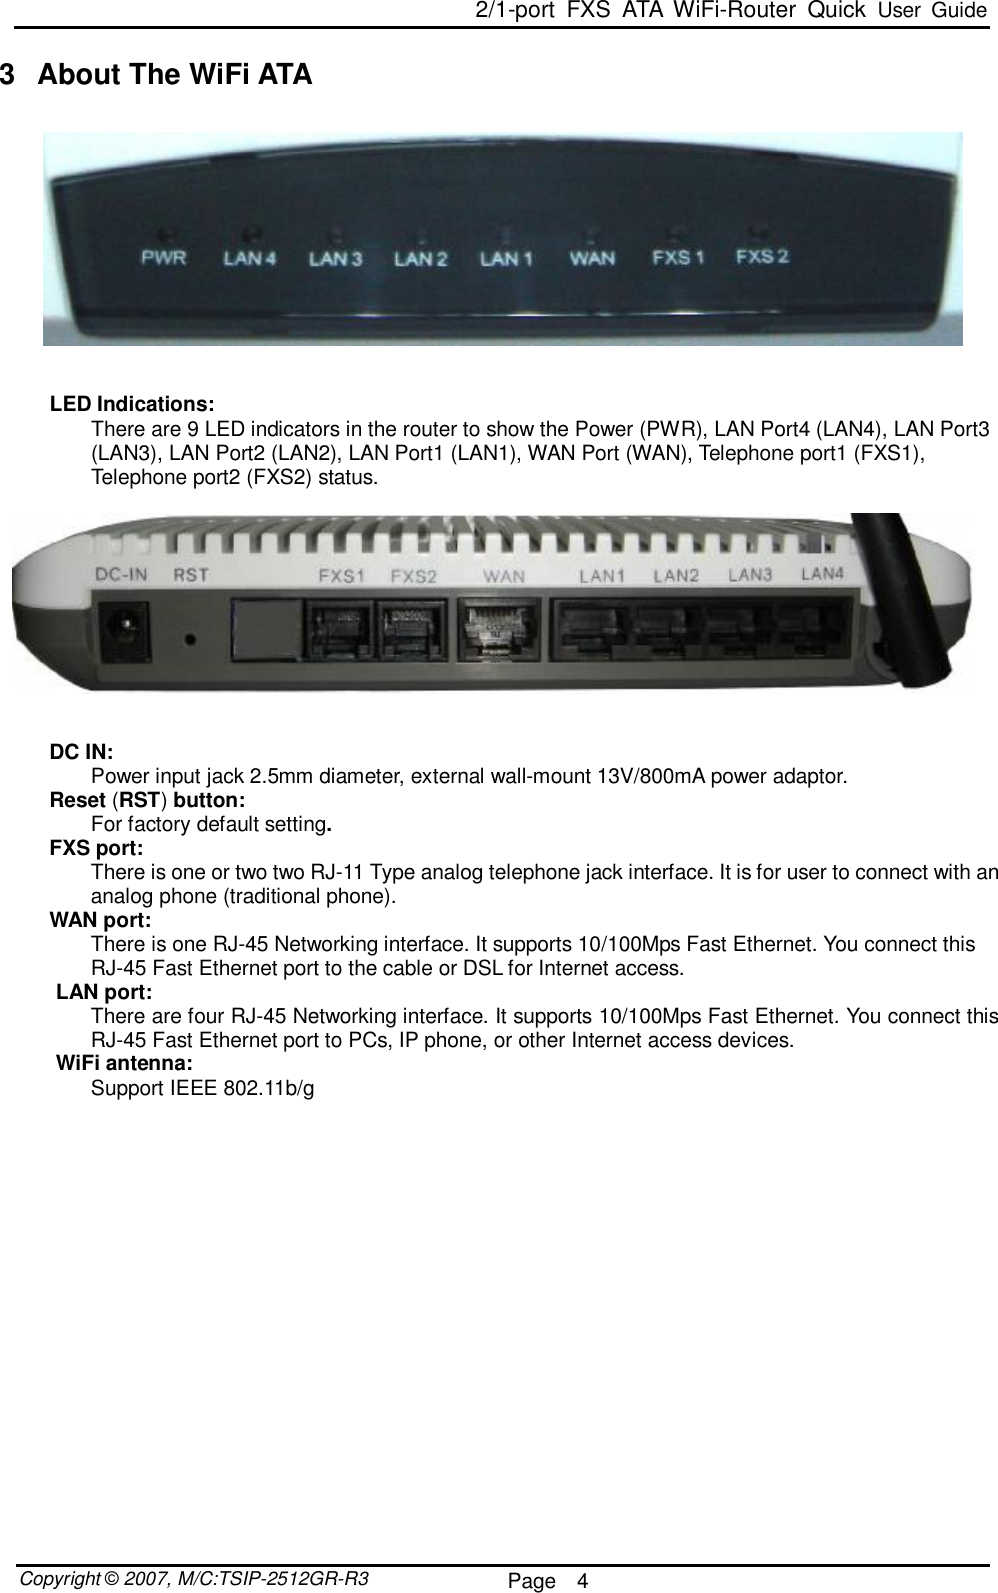  2/1-port FXS ATA WiFi-Router Quick User Guide  Copyright © 2007, M/C:TSIP-2512GR-R3  Page  4     3 About The WiFi ATA     LED Indications:  There are 9 LED indicators in the router to show the Power (PWR), LAN Port4 (LAN4), LAN Port3 (LAN3), LAN Port2 (LAN2), LAN Port1 (LAN1), WAN Port (WAN), Telephone port1 (FXS1), Telephone port2 (FXS2) status.     DC IN:  Power input jack 2.5mm diameter, external wall-mount 13V/800mA power adaptor. Reset (RST) button:  For factory default setting. FXS port:  There is one or two two RJ-11 Type analog telephone jack interface. It is for user to connect with an analog phone (traditional phone). WAN port:  There is one RJ-45 Networking interface. It supports 10/100Mps Fast Ethernet. You connect this RJ-45 Fast Ethernet port to the cable or DSL for Internet access. LAN port:  There are four RJ-45 Networking interface. It supports 10/100Mps Fast Ethernet. You connect this RJ-45 Fast Ethernet port to PCs, IP phone, or other Internet access devices. WiFi antenna:  Support IEEE 802.11b/g                  